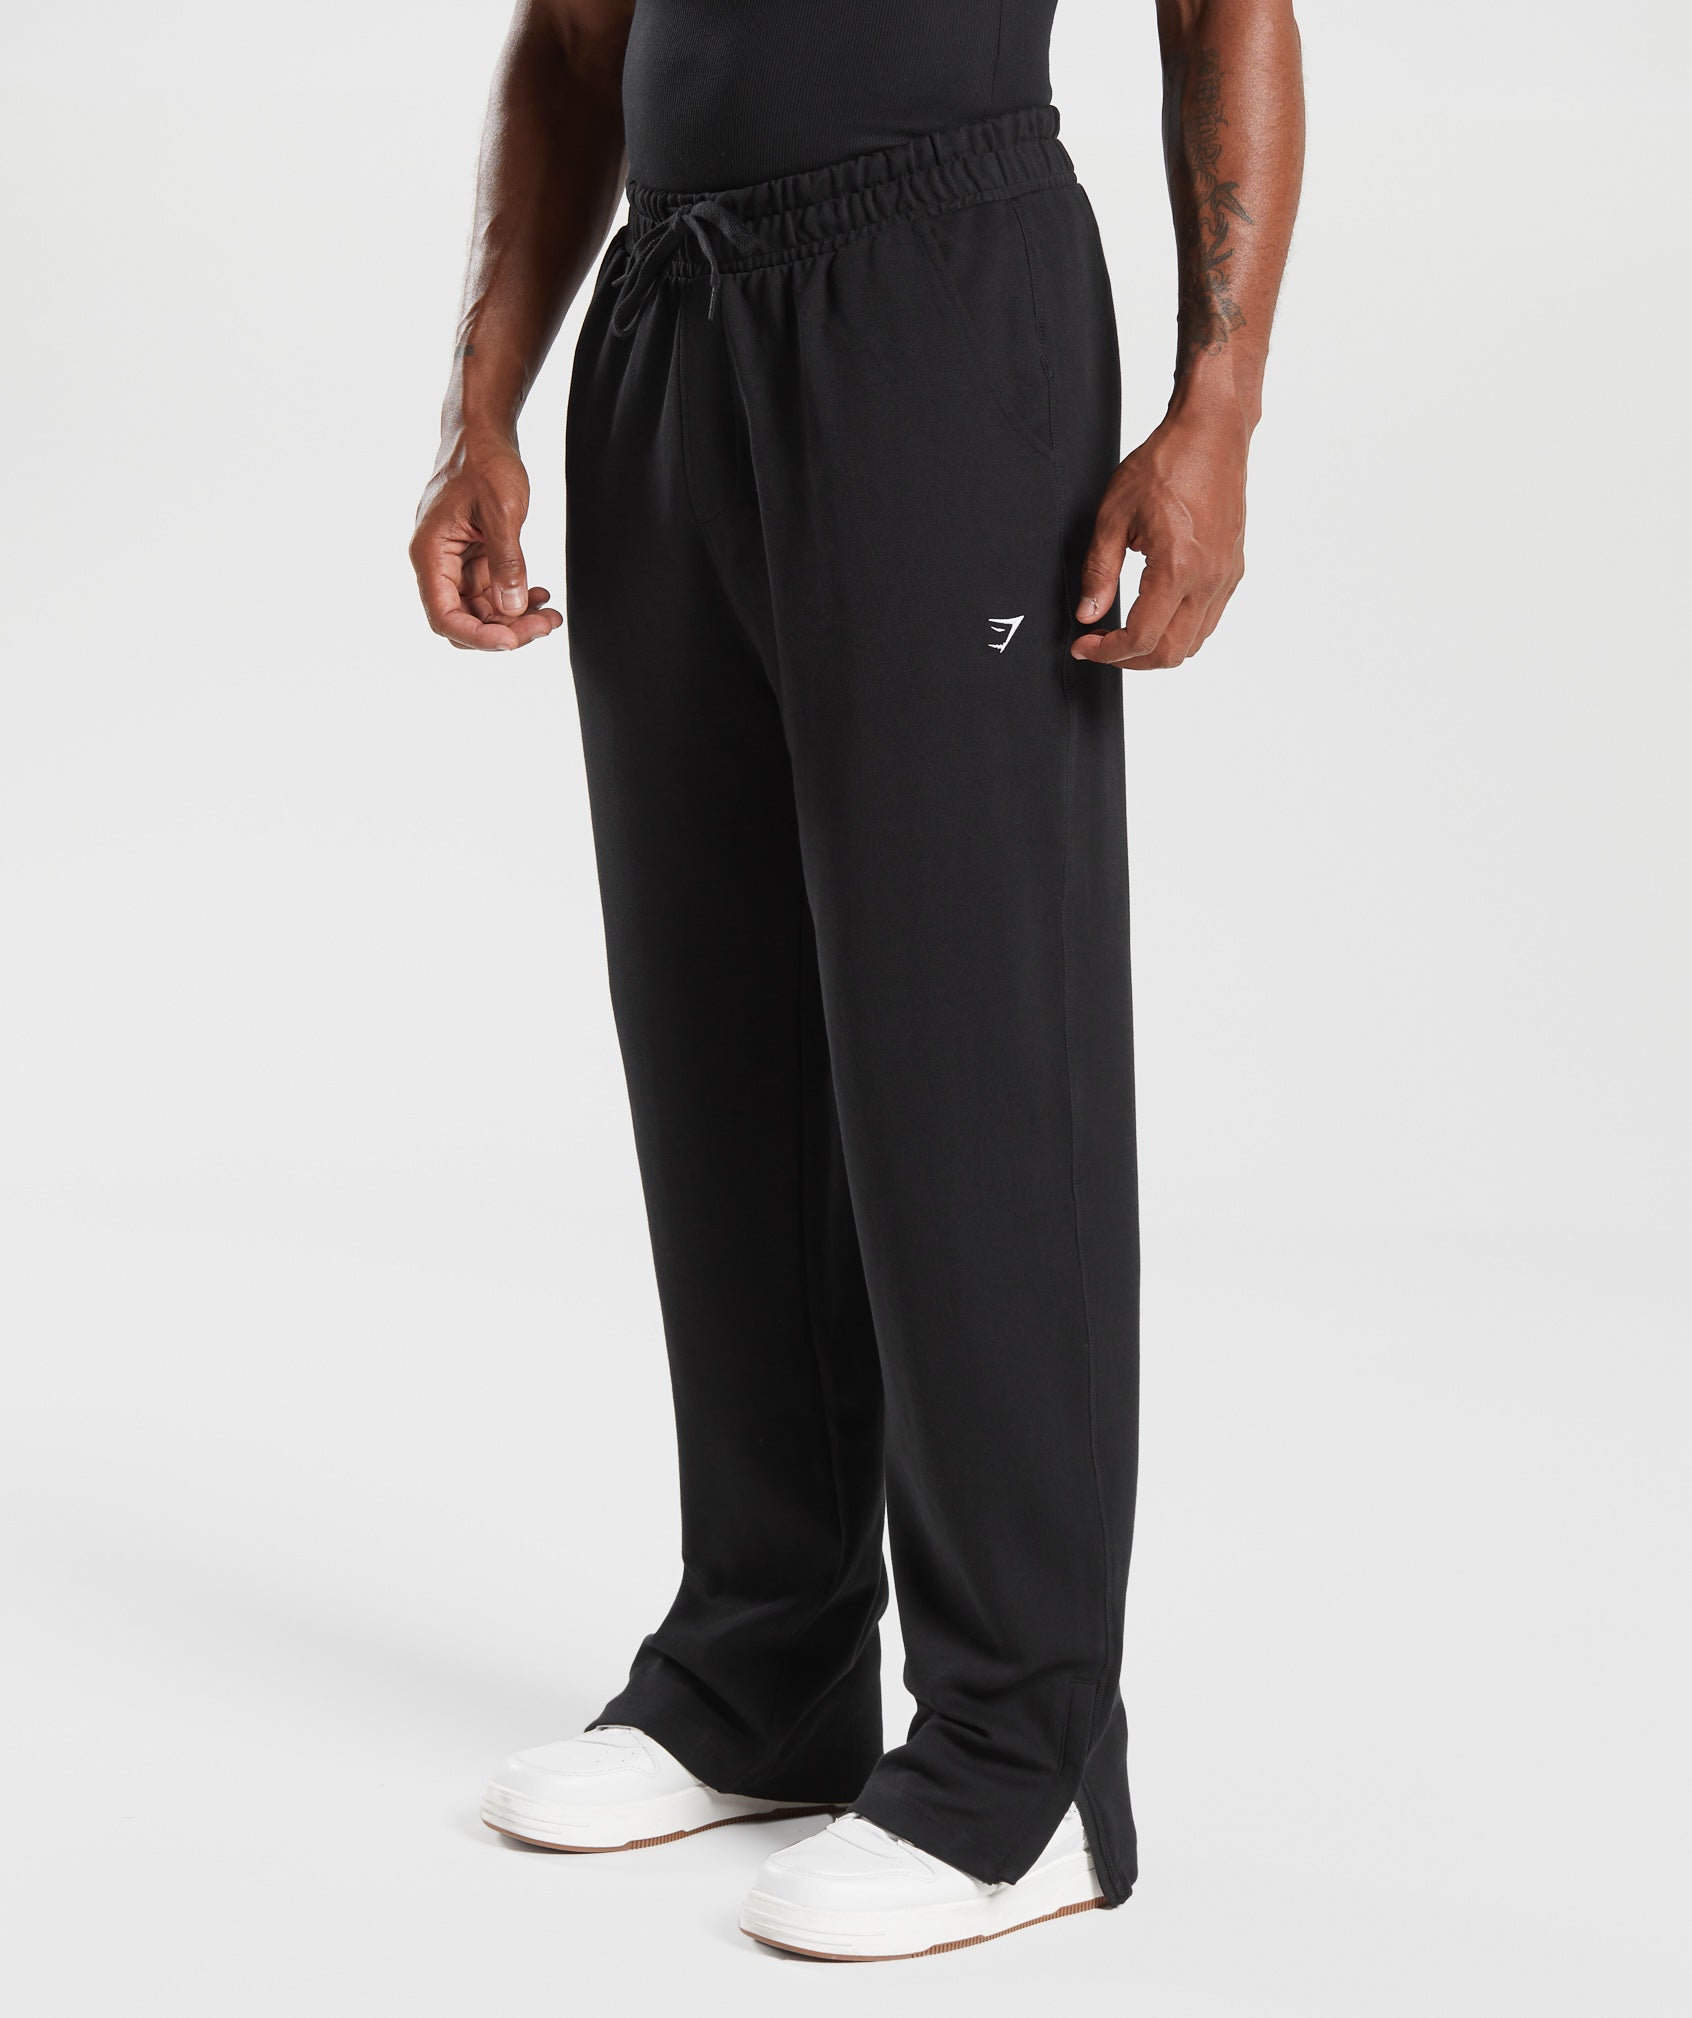 Rest Day Track Pants in Black - view 1